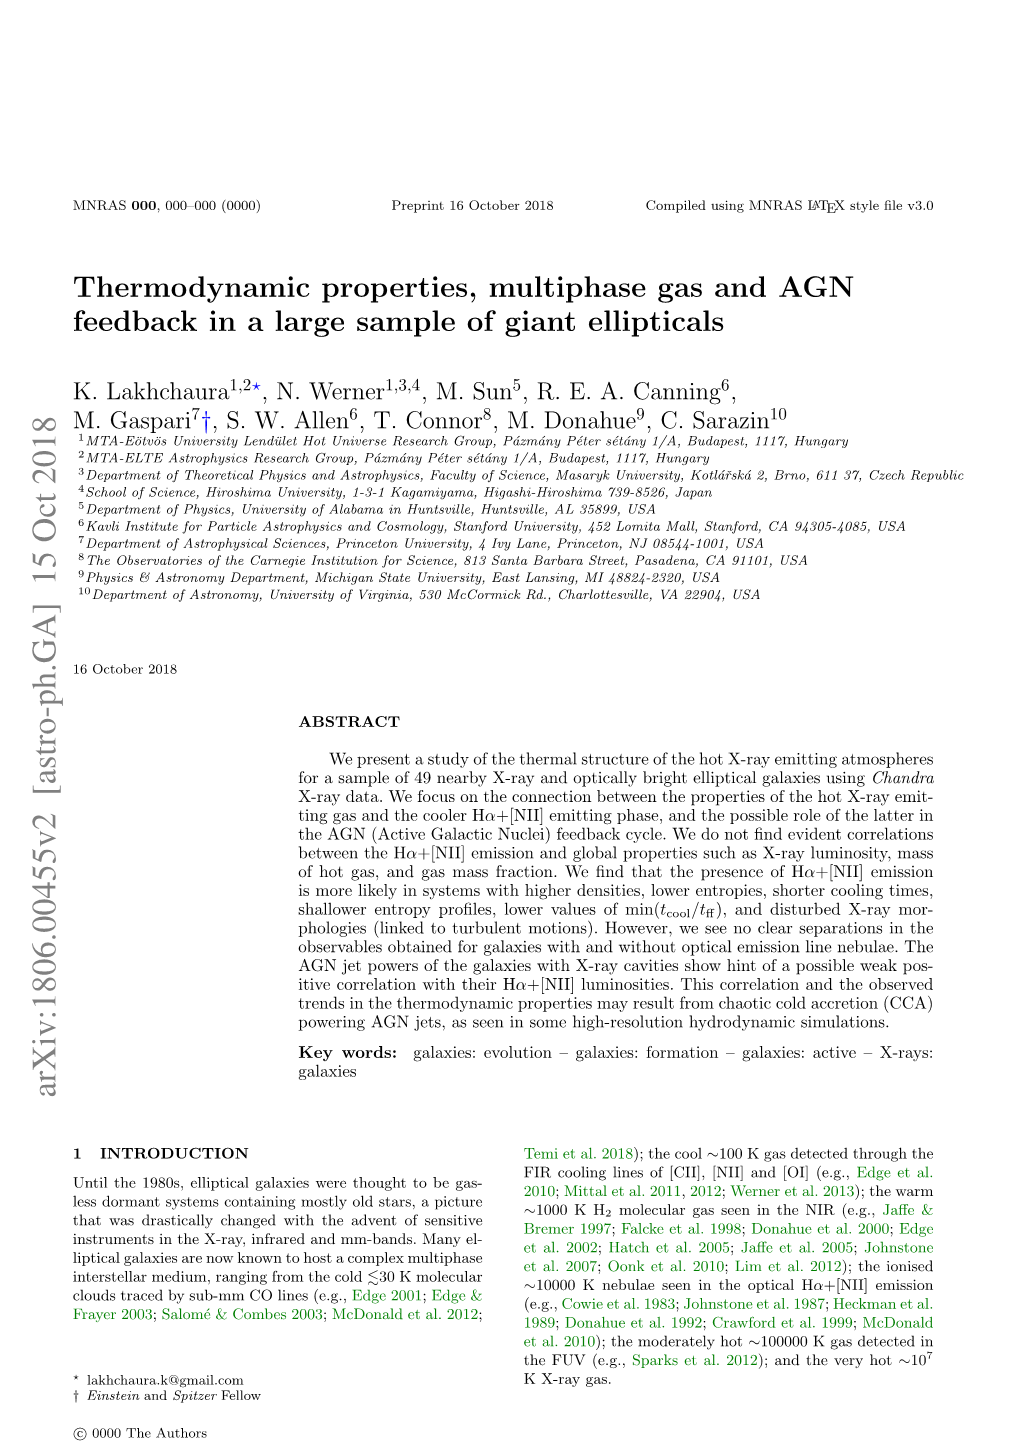 Thermodynamic Properties, Multiphase Gas, and AGN Feedback